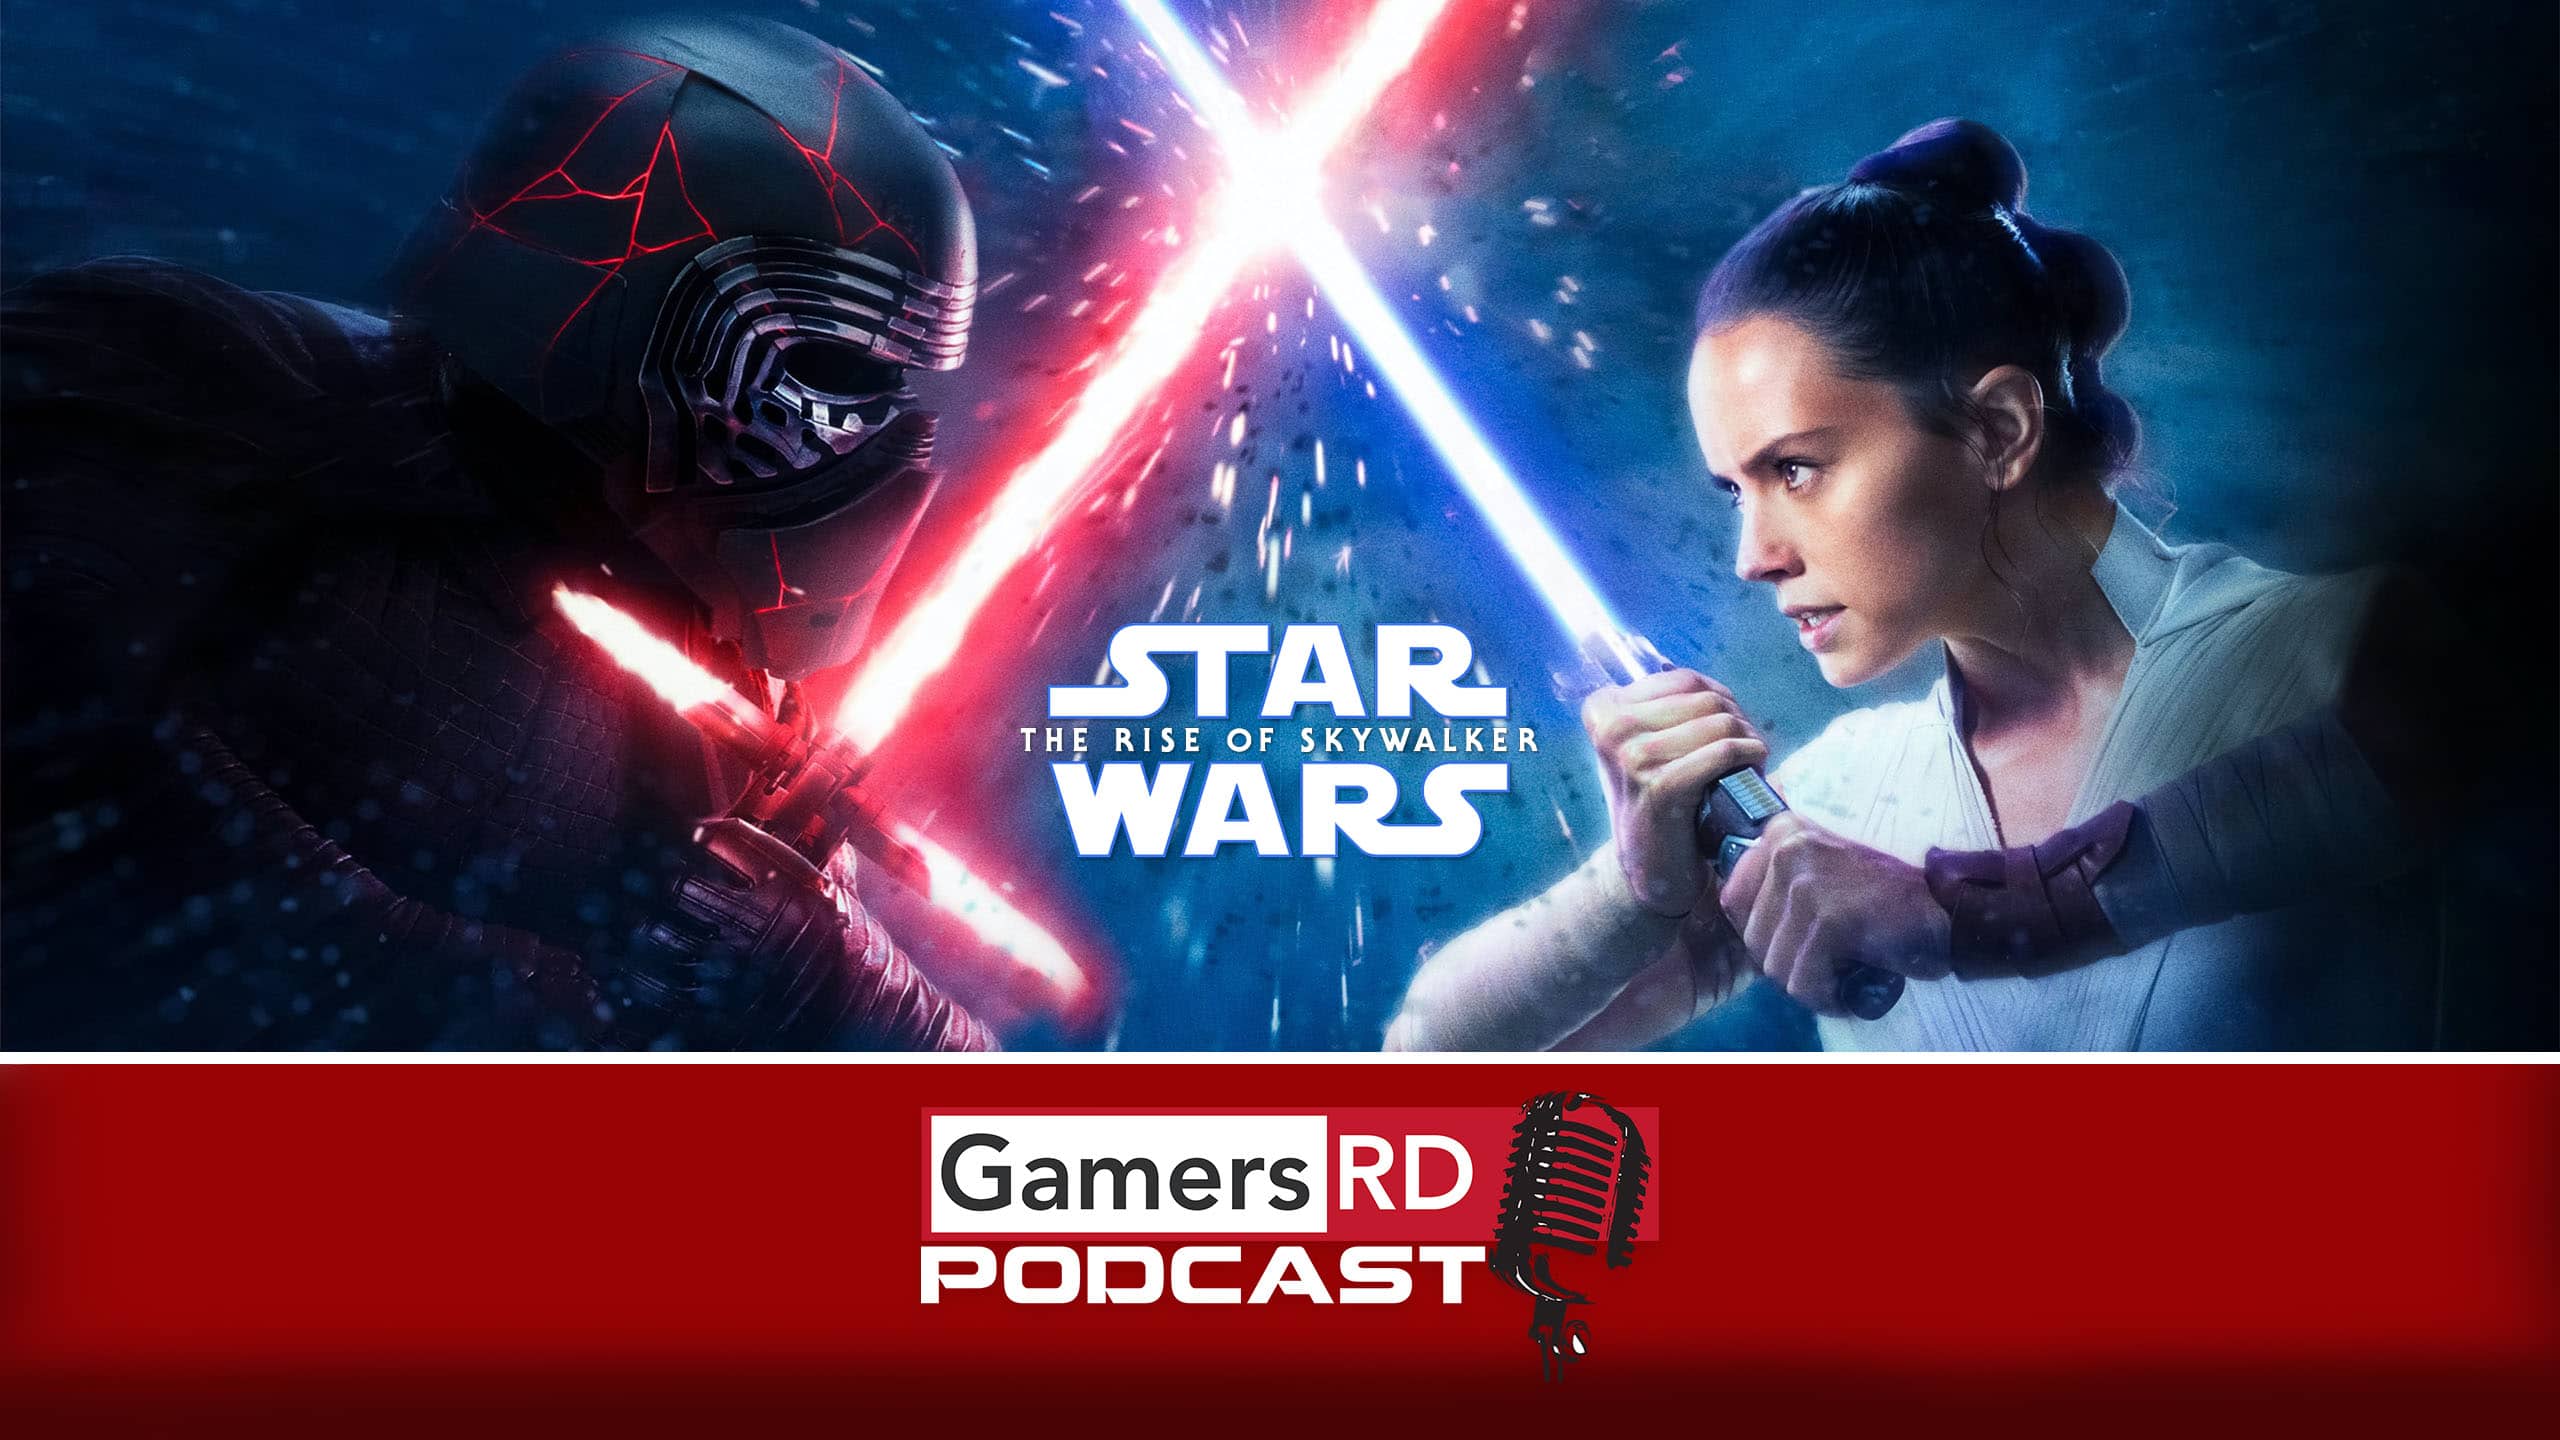 GamersRD Podcast Star Wars ,Review